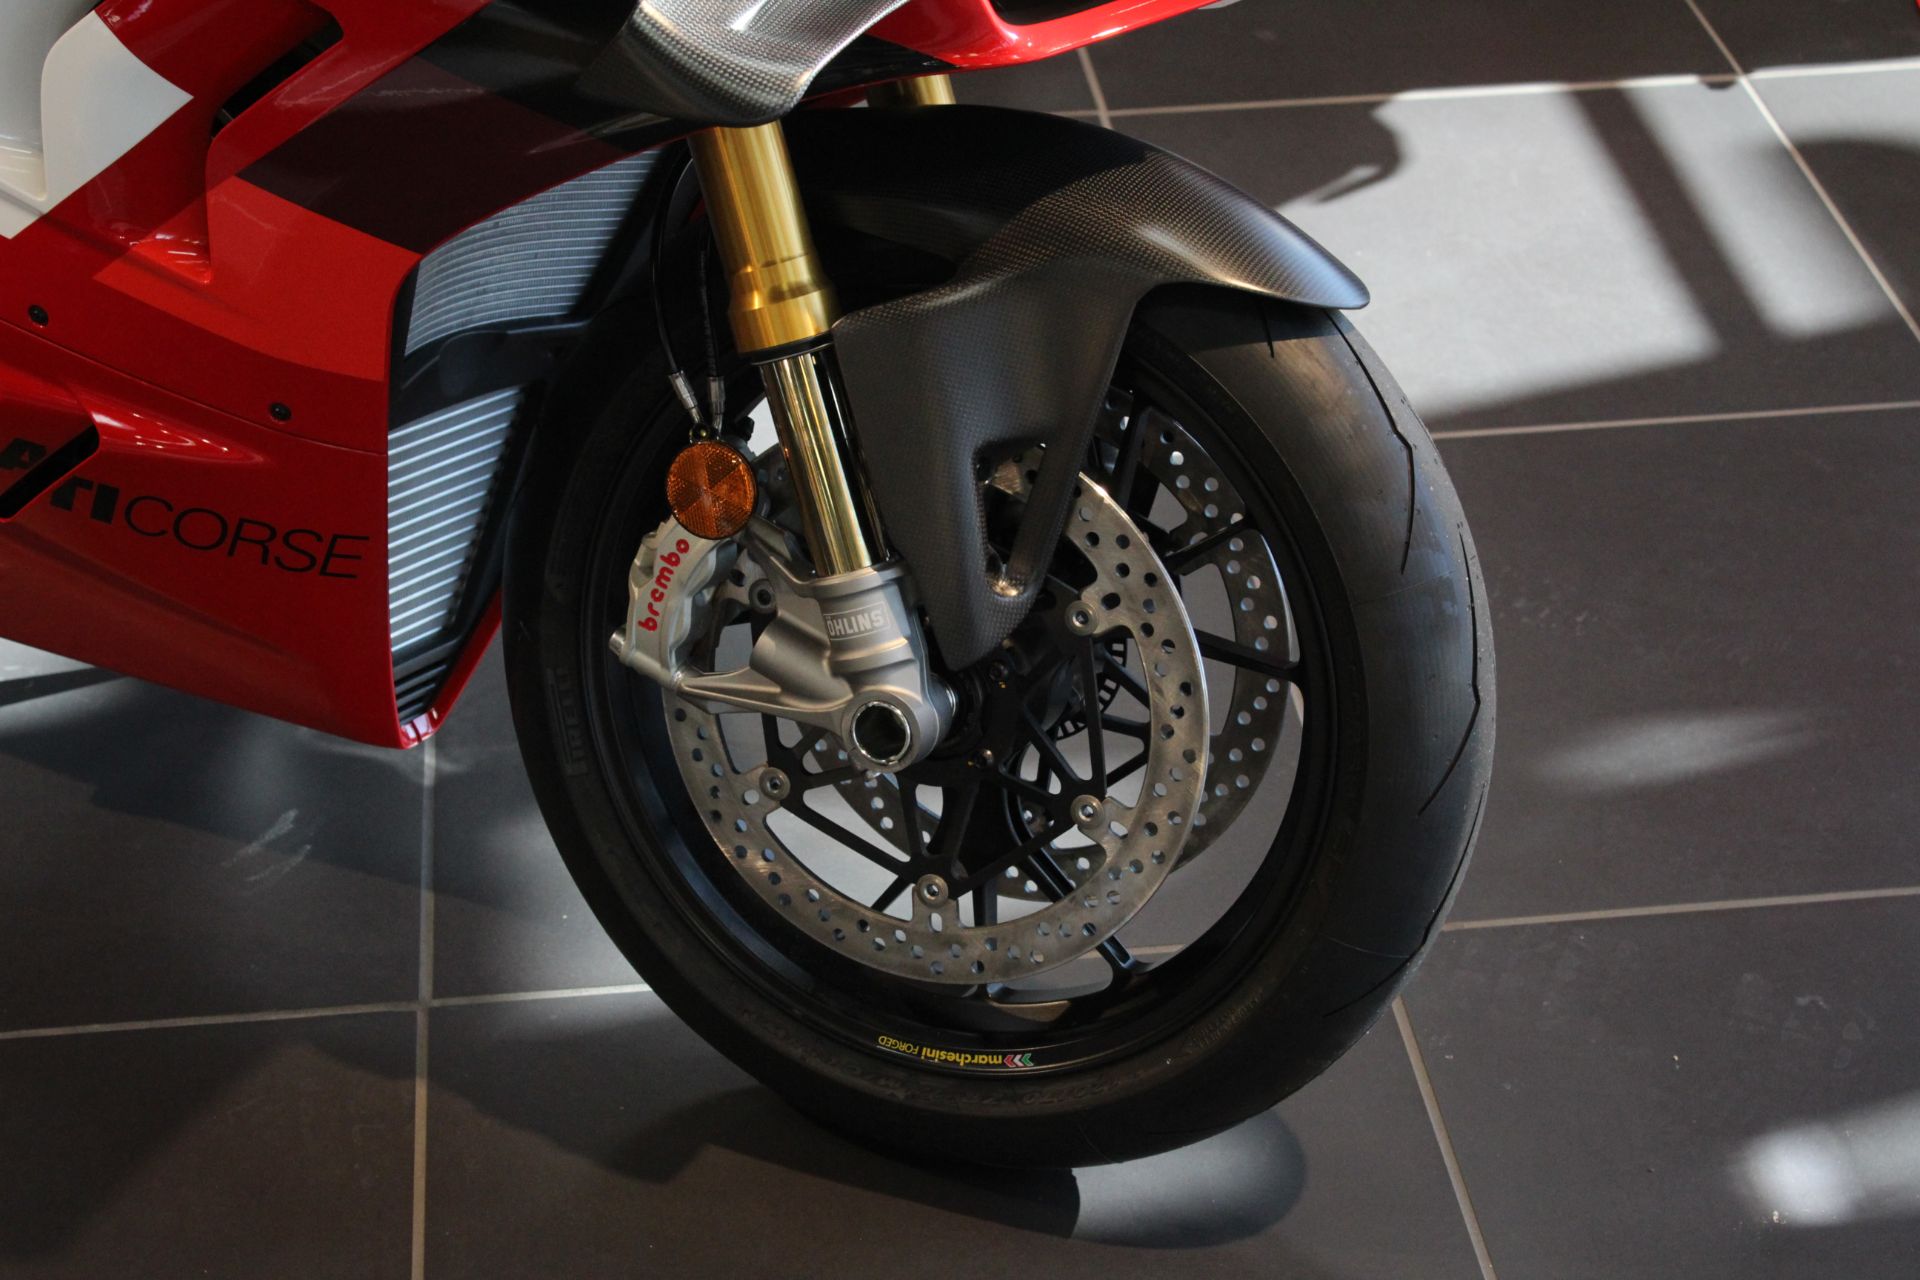 2024 Ducati Panigale V4 R in West Allis, Wisconsin - Photo 2